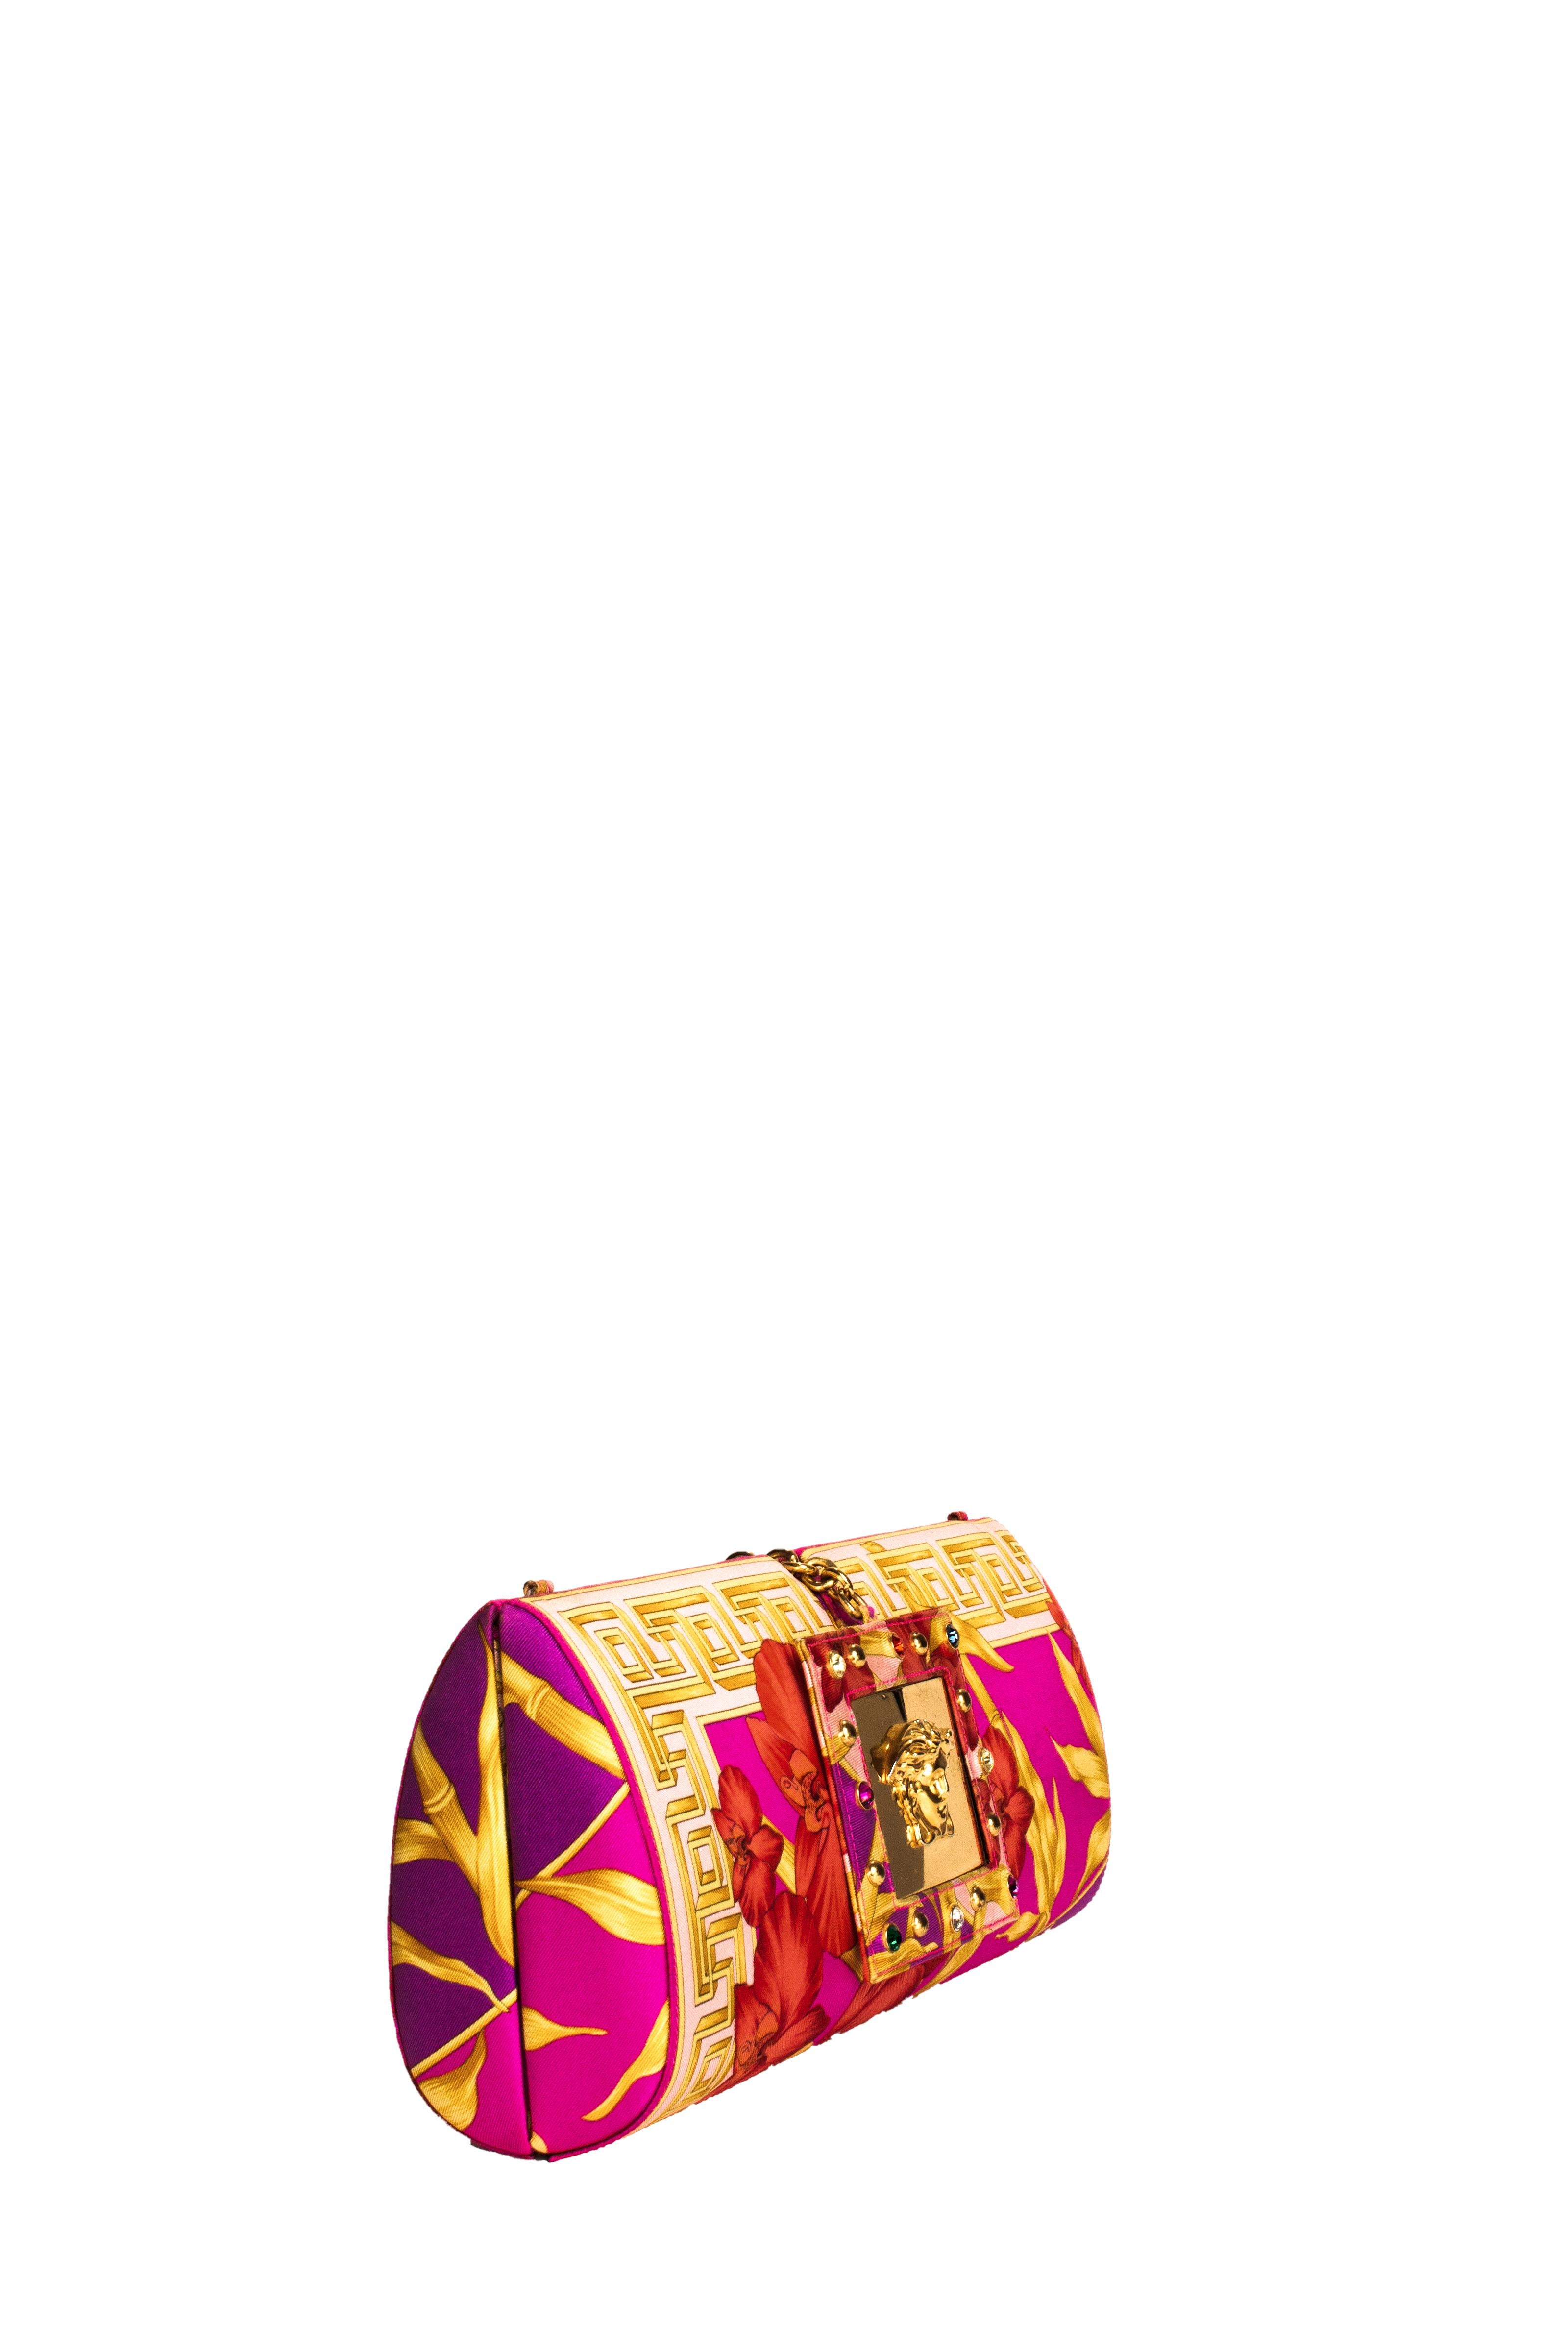 Women's S/S 2000 Gianni Versace by Donatella Runway Pink Printed Silk Convertible Clutch For Sale